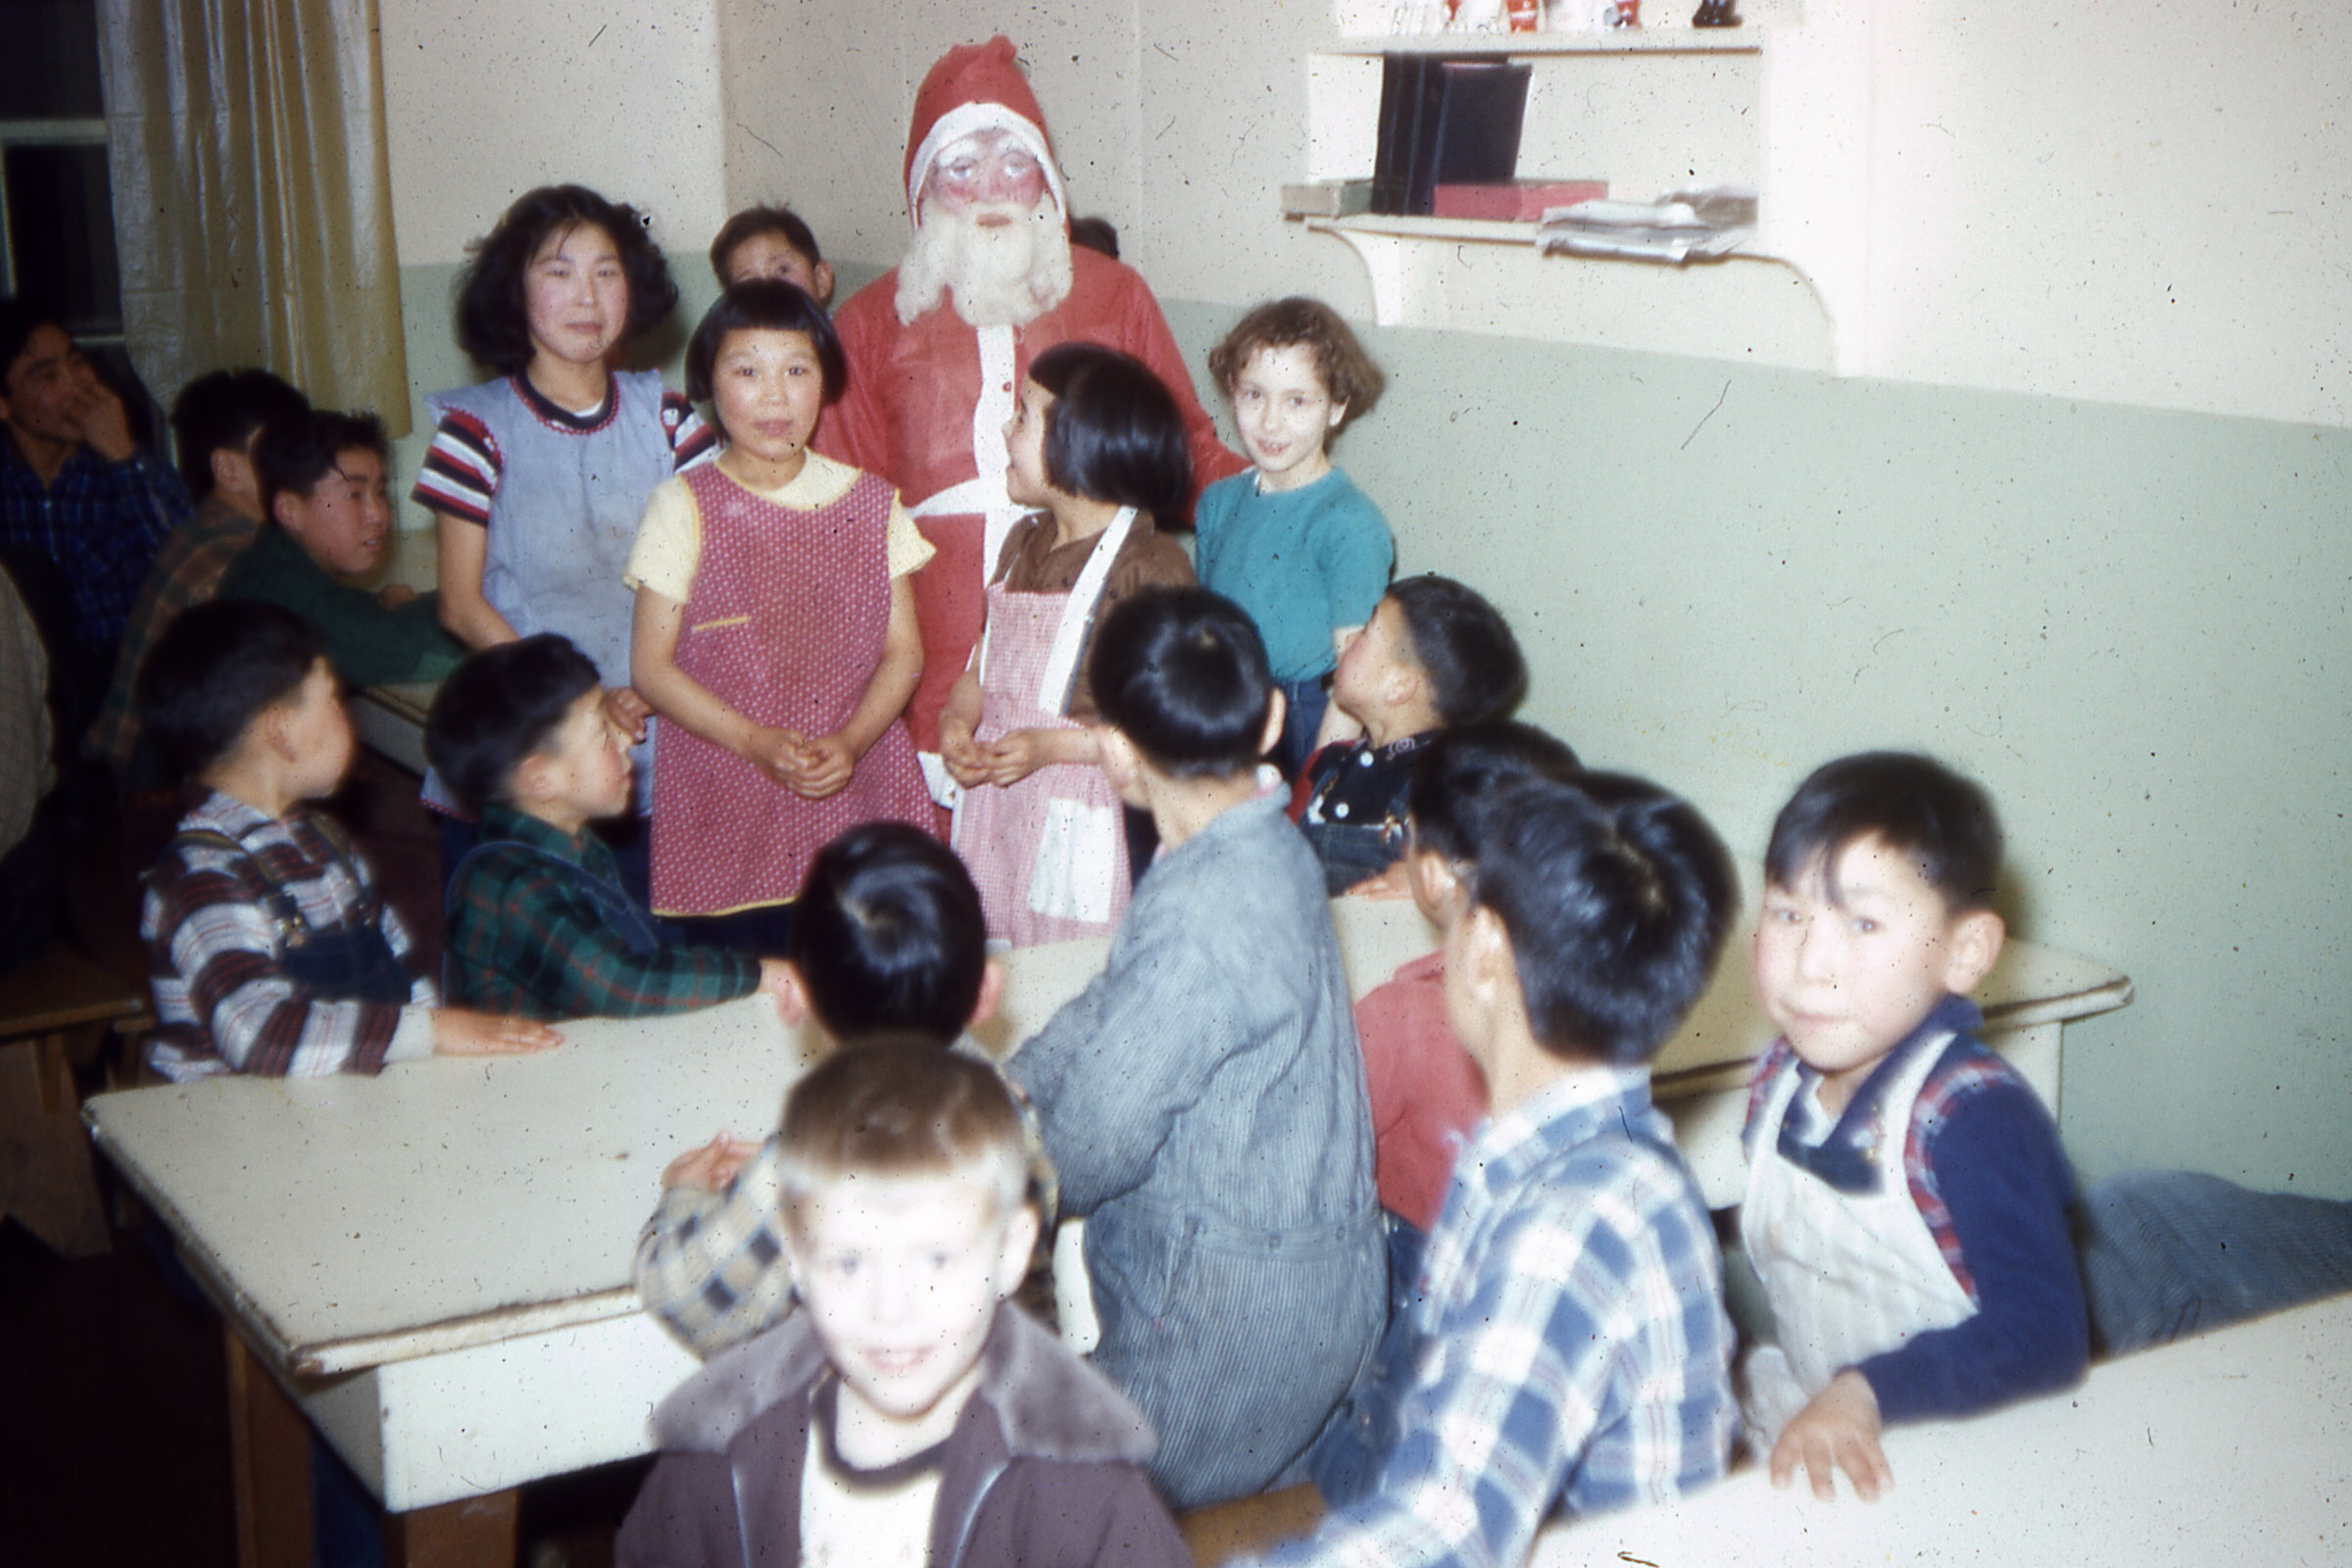  1955 Santa with children.Photo on loan from the Henkelman Archives. 